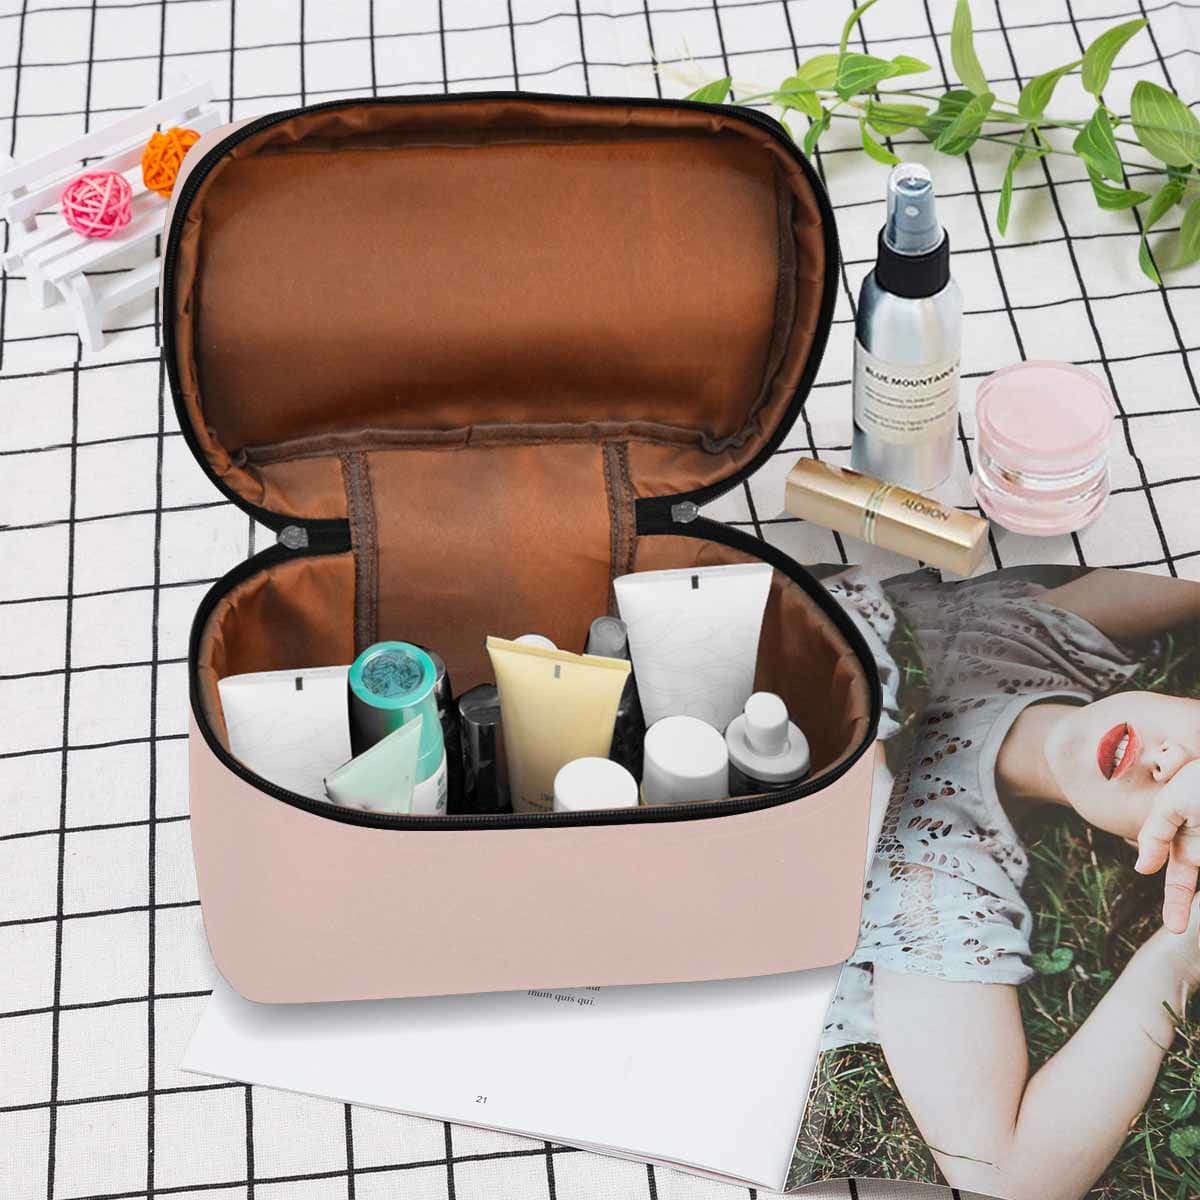 Cosmetic Bag Scallop Seashell Pink Travel Case - Bags | Cosmetic Bags